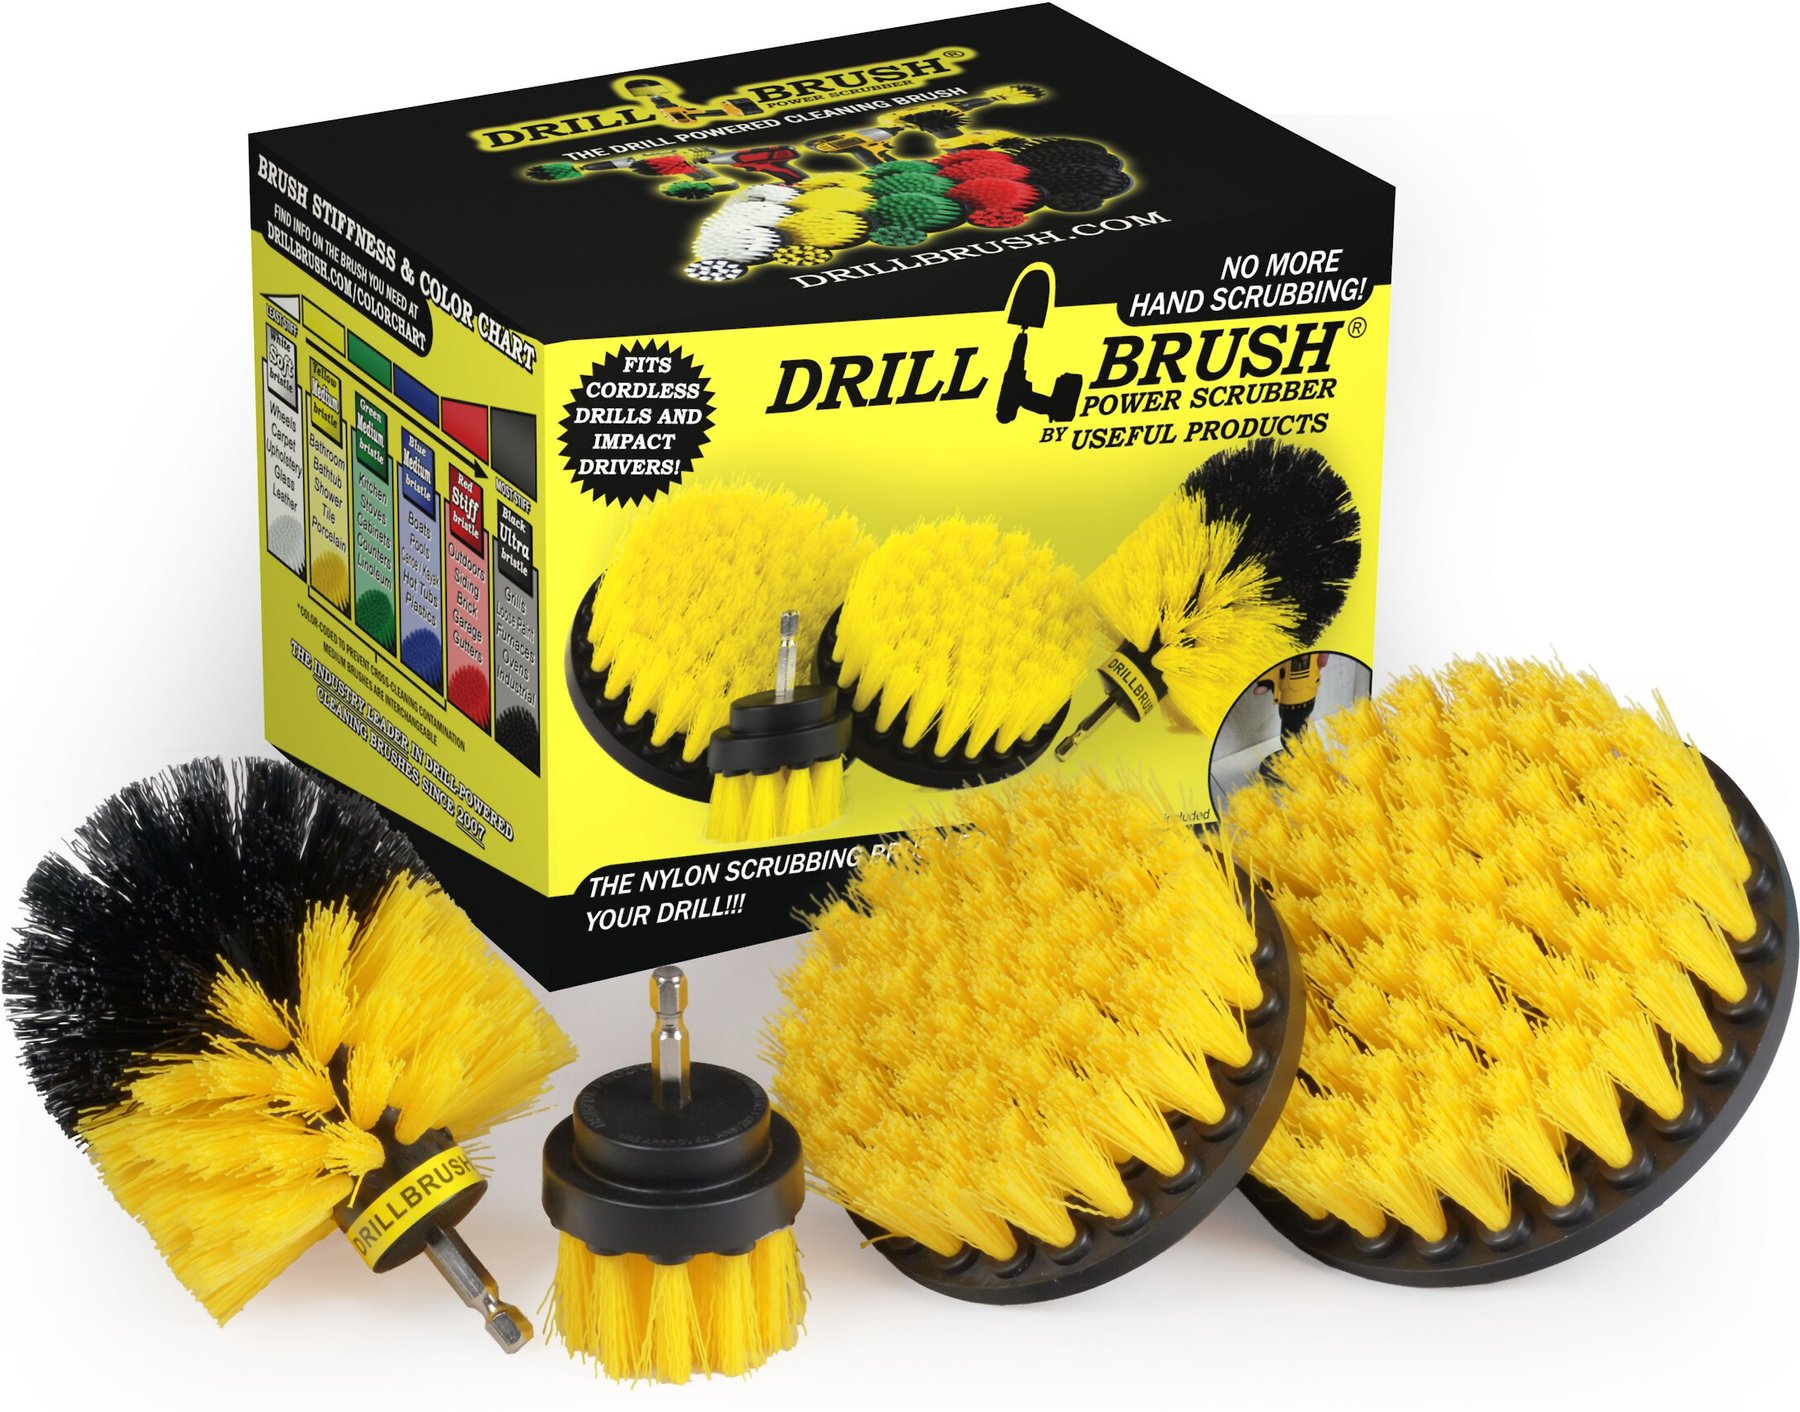 4 Drill Brush Attachment Power Scrubber Carpet Tile Cleaning Scrub Tub Cleaner 